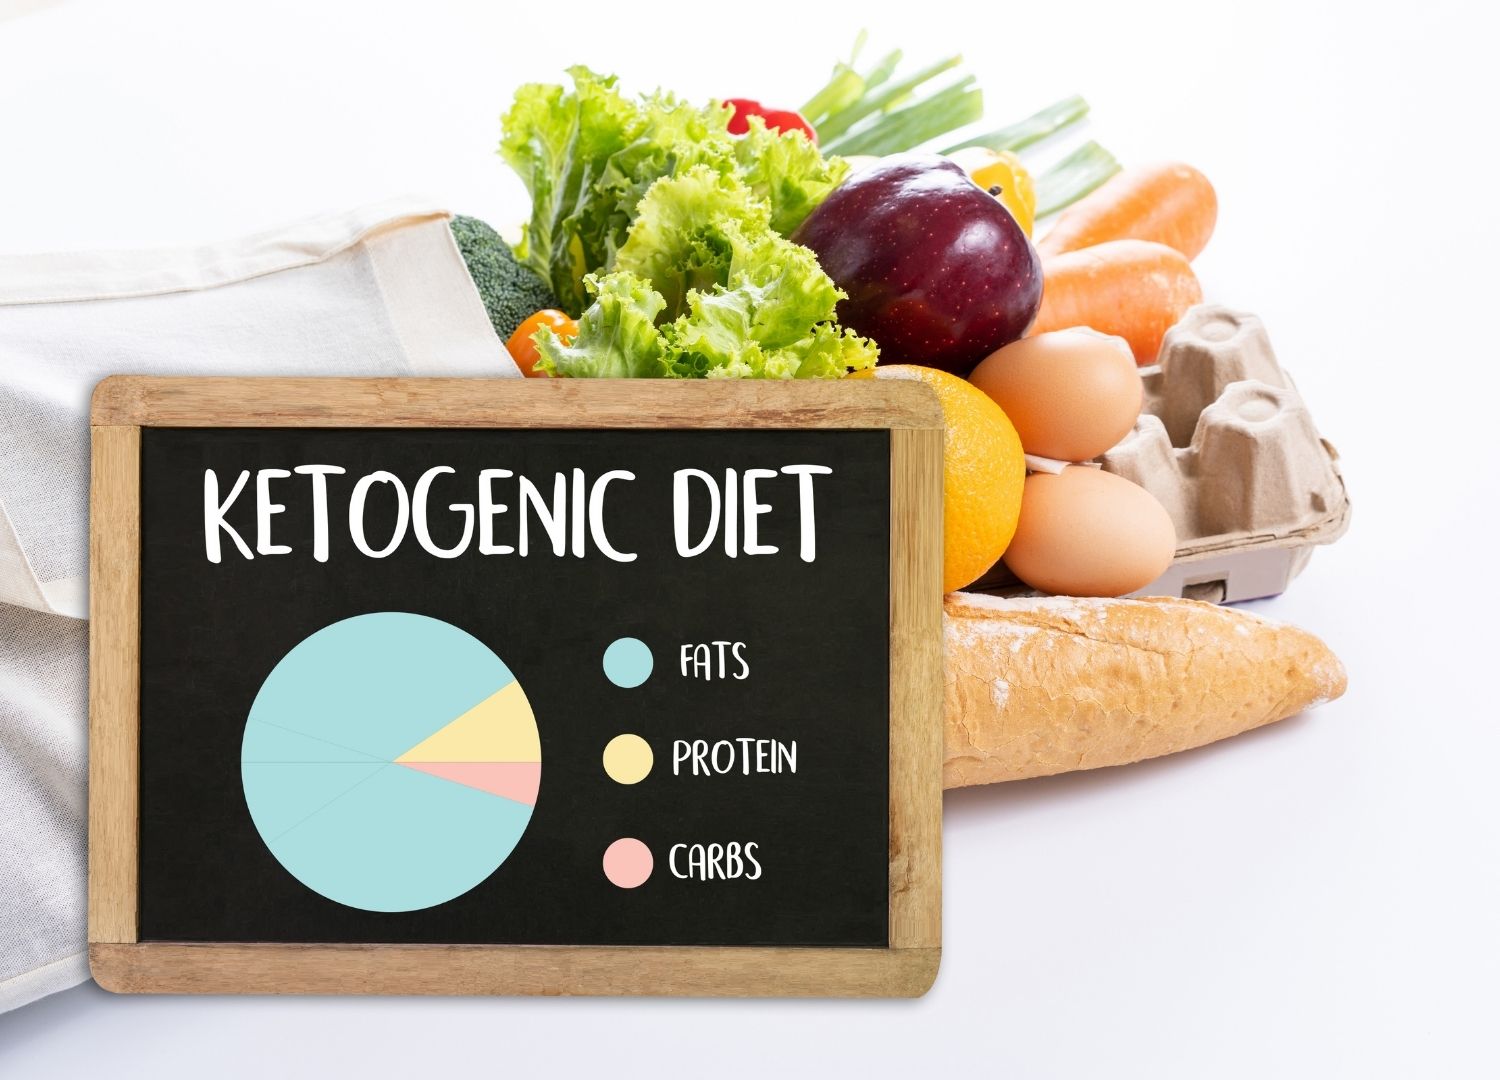 Are Keto Diets Really Effective?